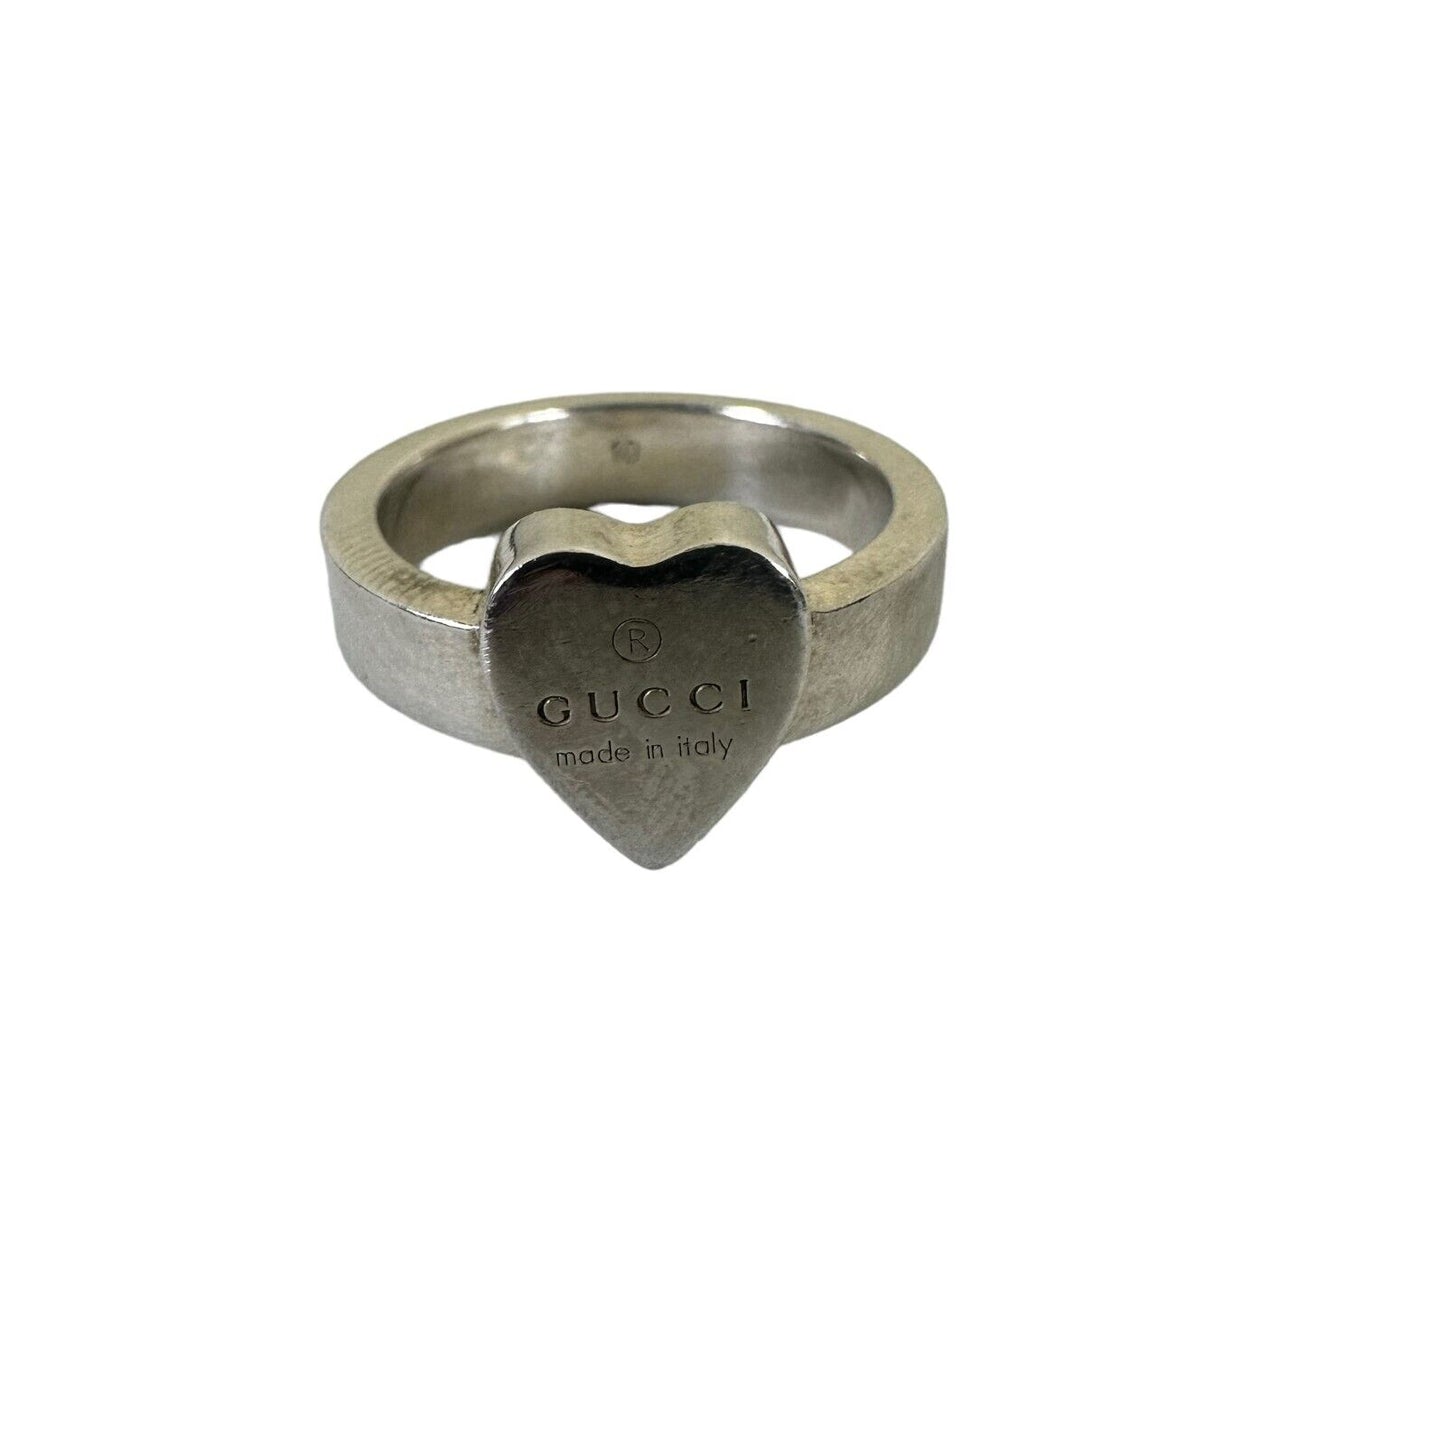 Gucci Trademark Sterling Silver Heart Ring Authenticated W/ COA